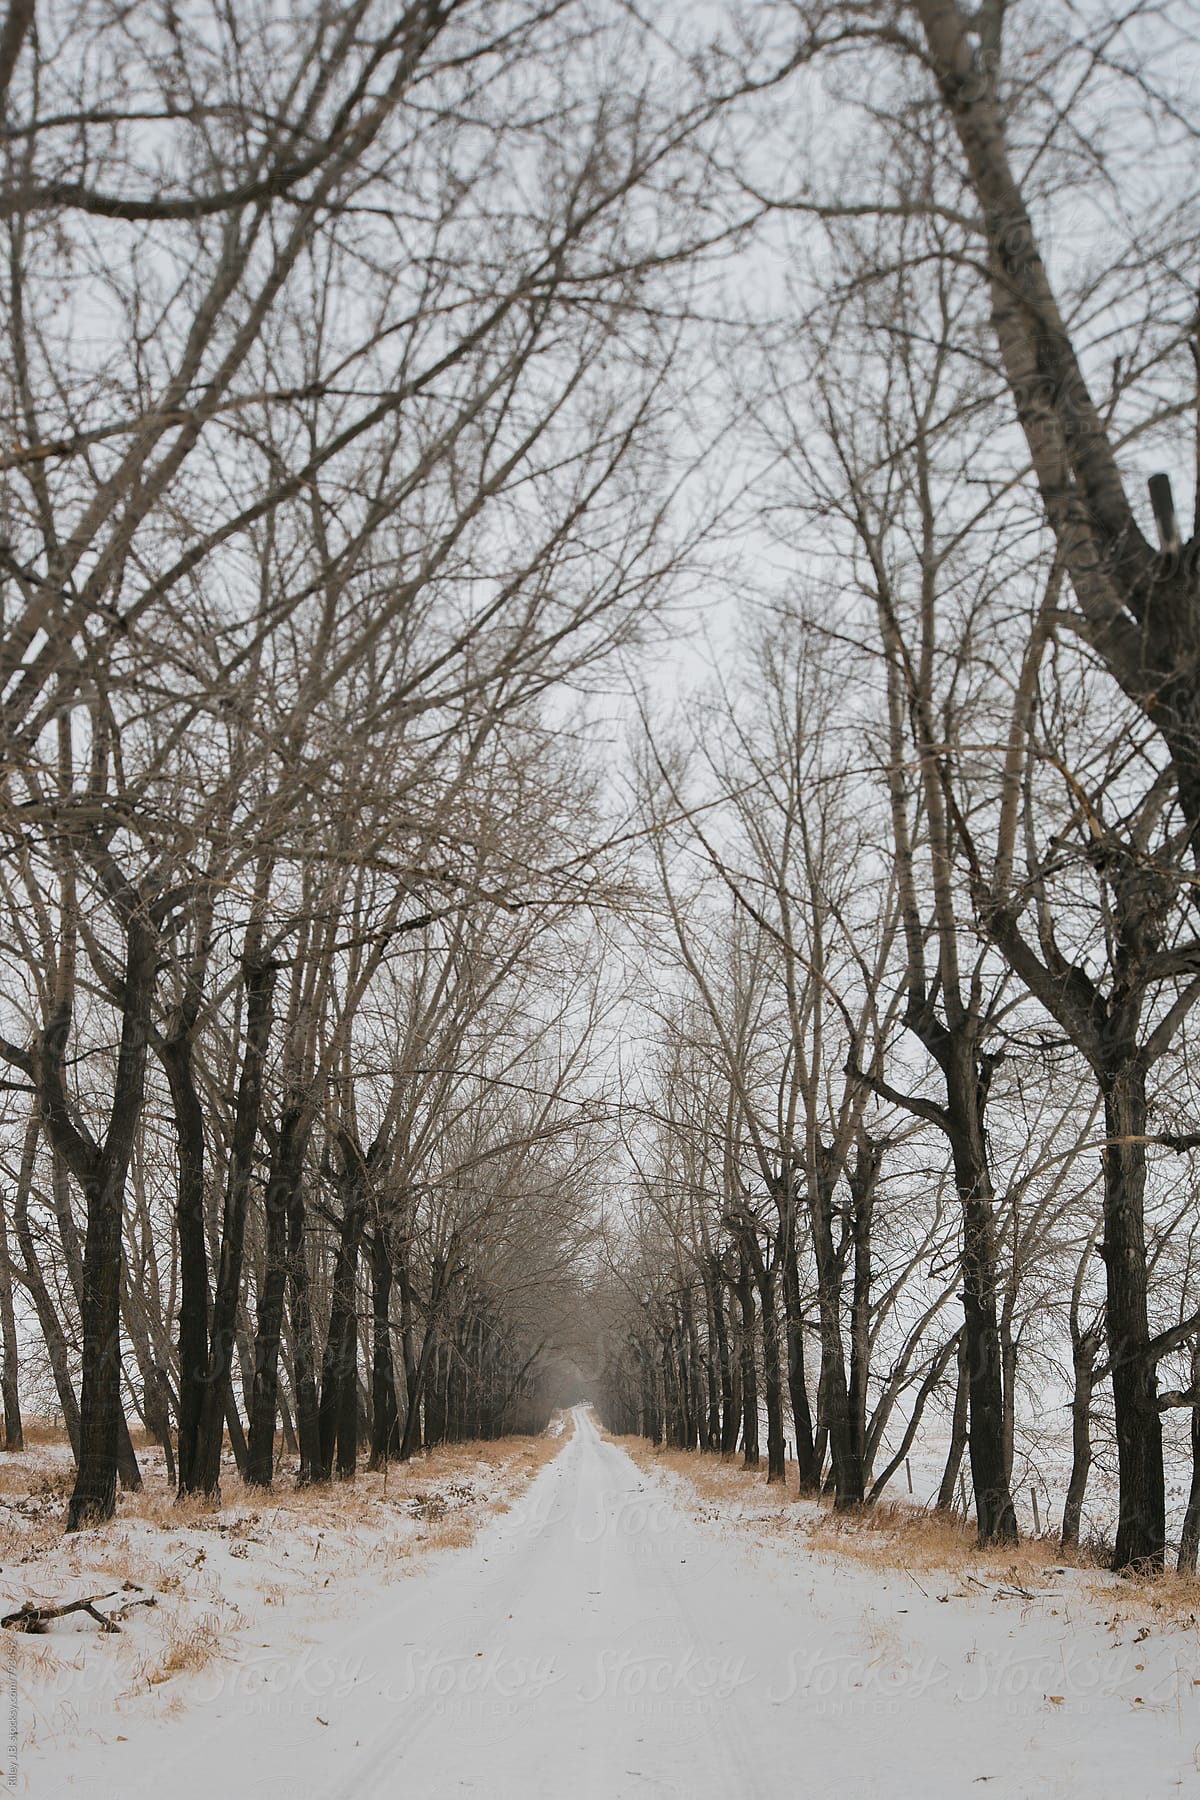 Tilt-shift perspective of a long, tree-lined driveway in winter